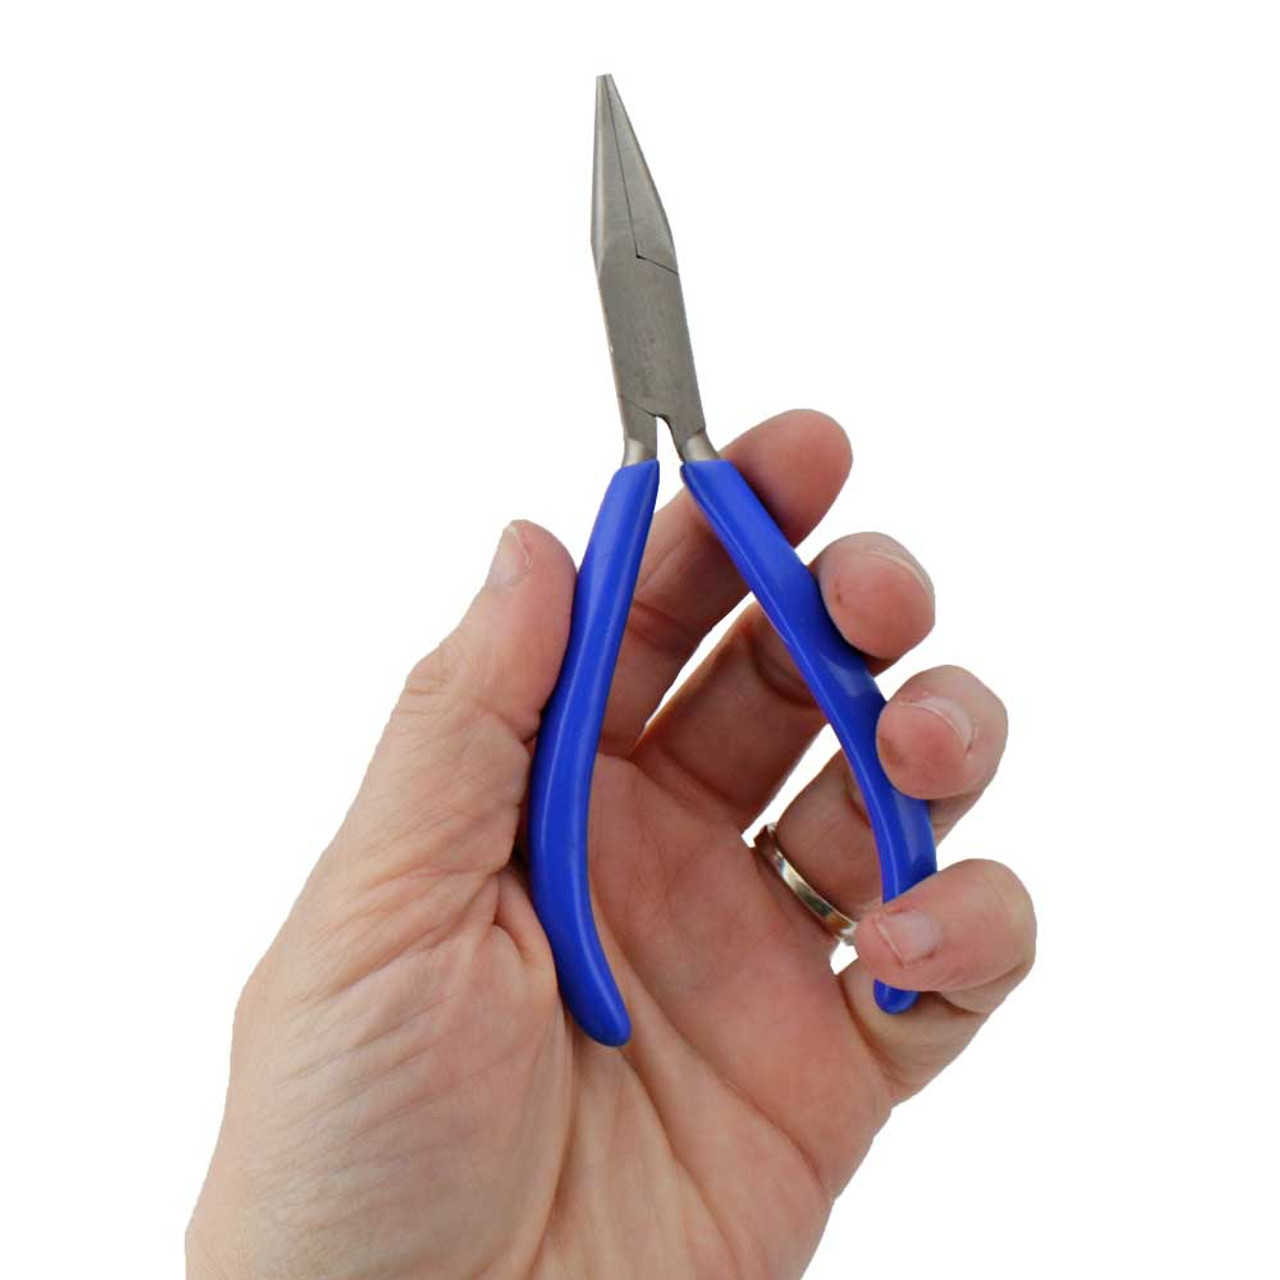 Student Series Jewelers Chain Nose Pliers | Esslinger